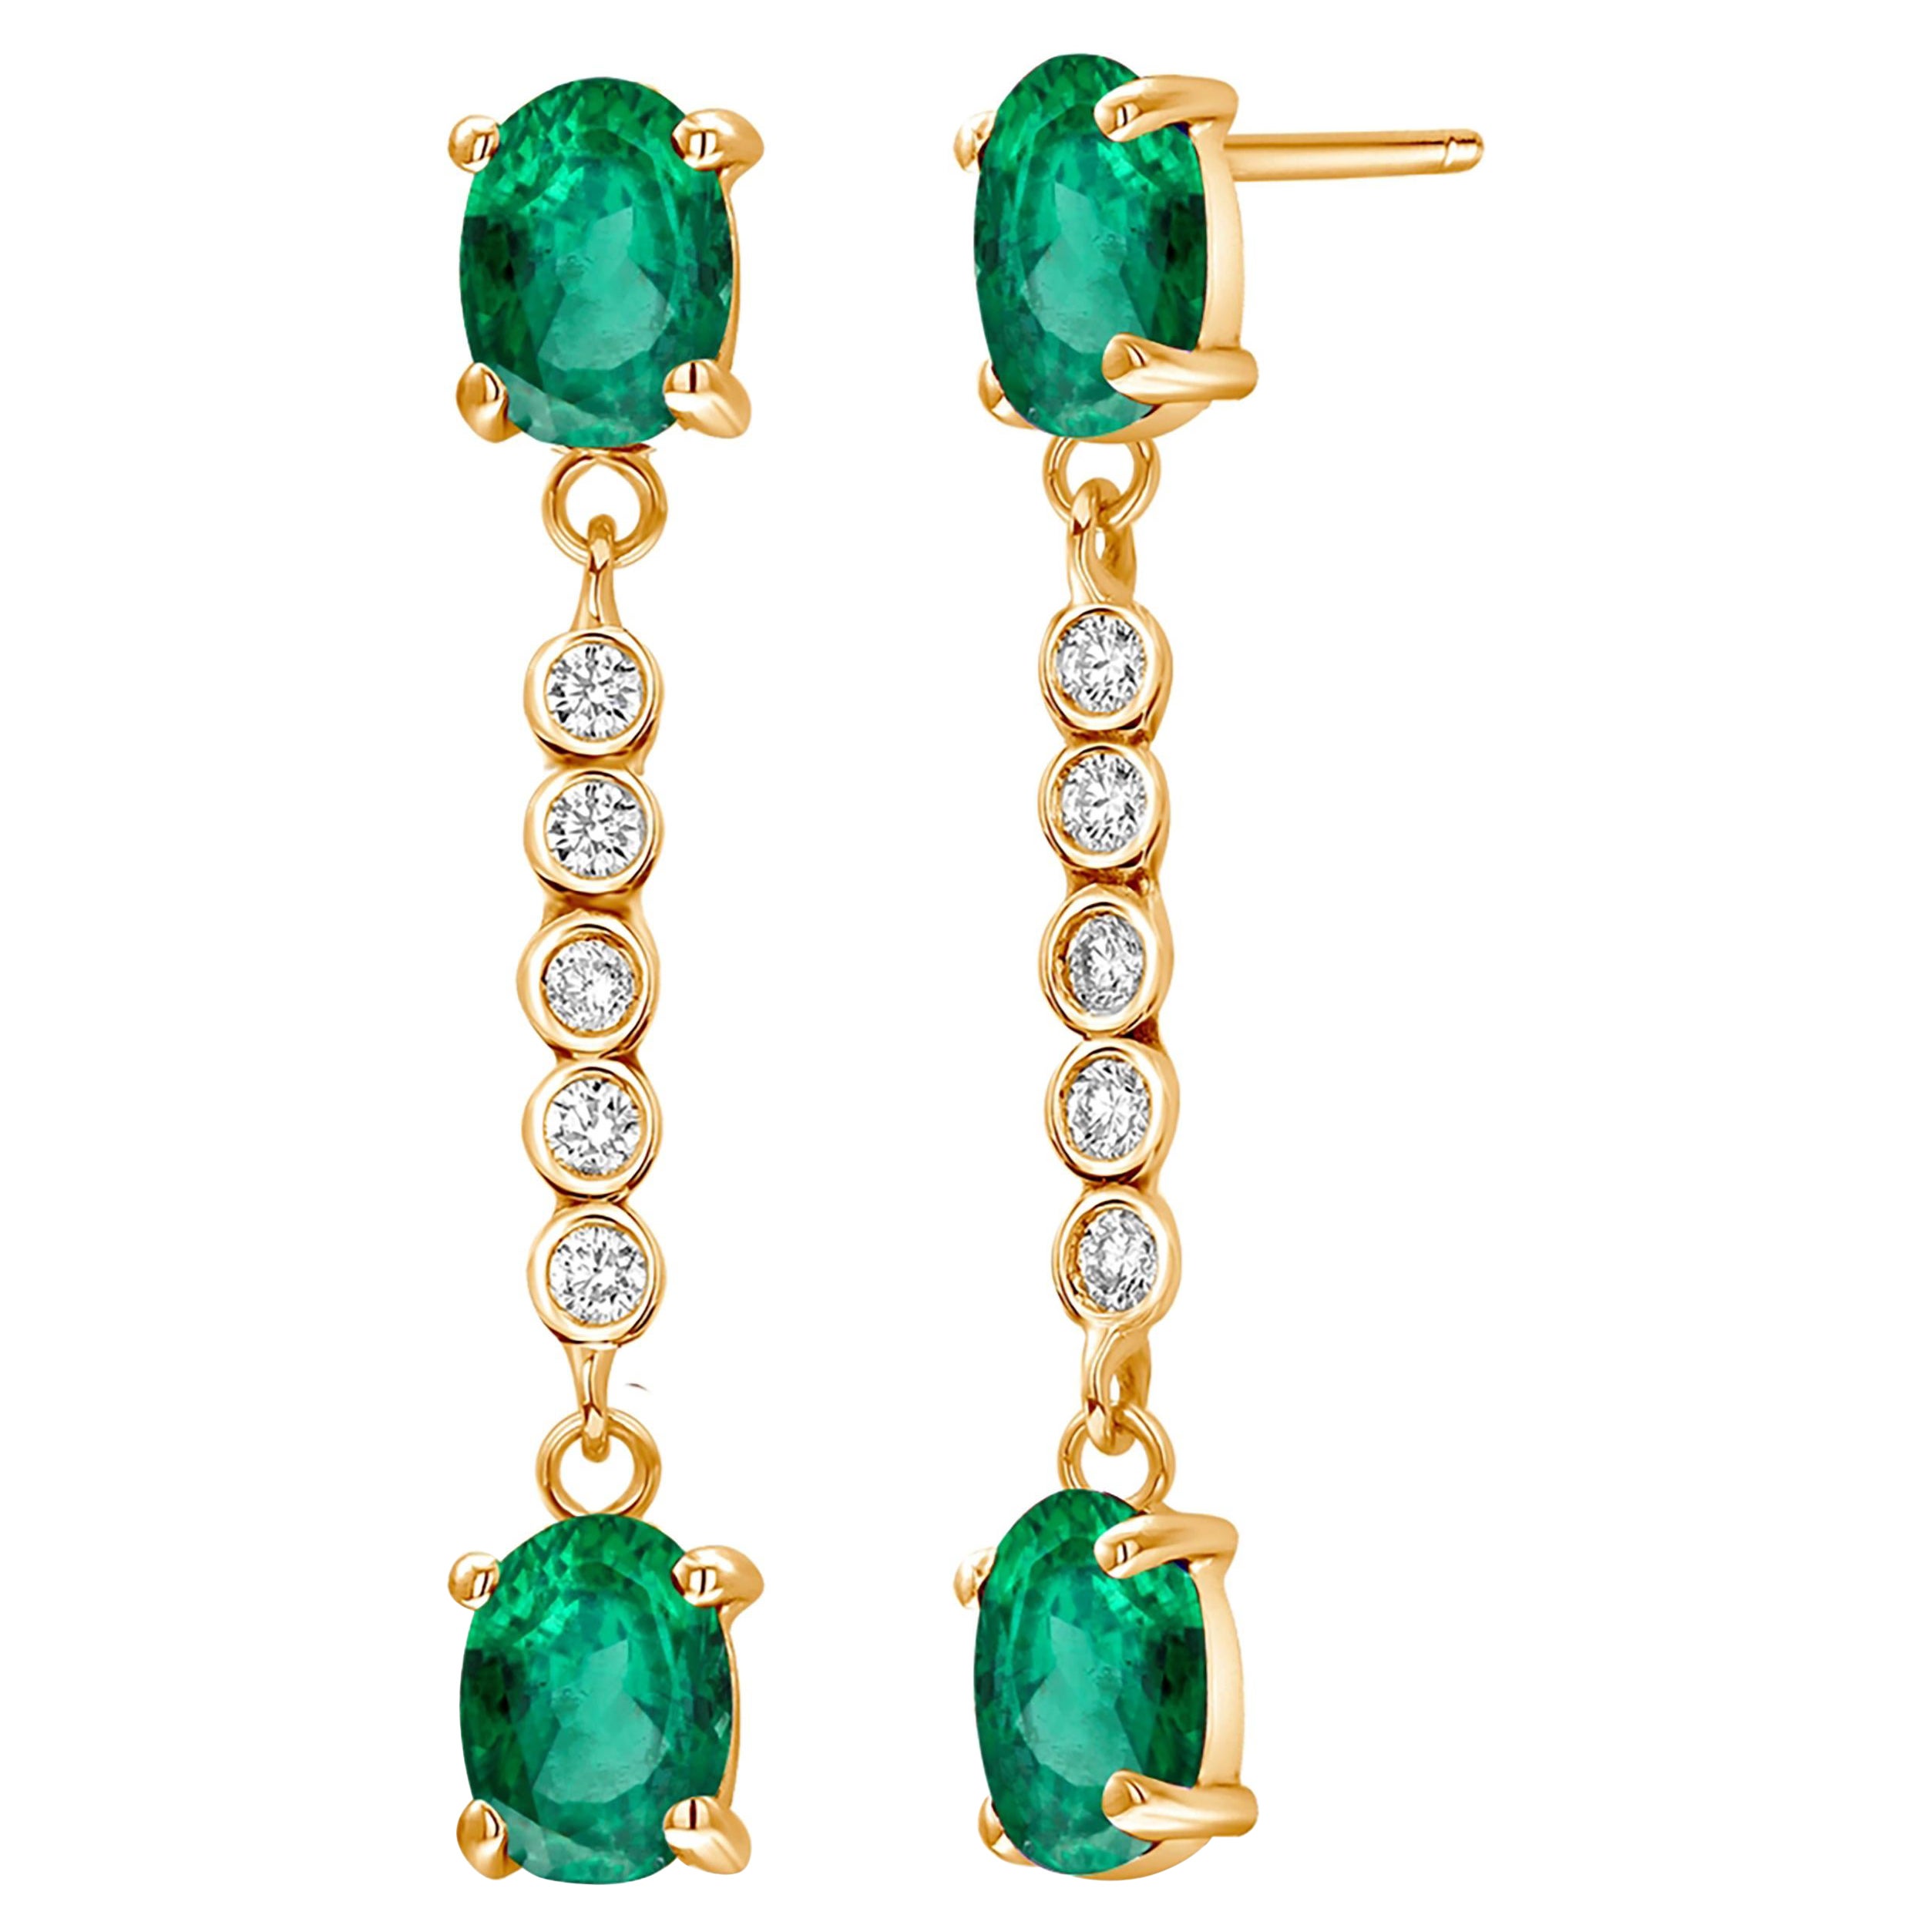 Double Tier Oval Emerald and Diamond Drop Yellow Gold Earrings